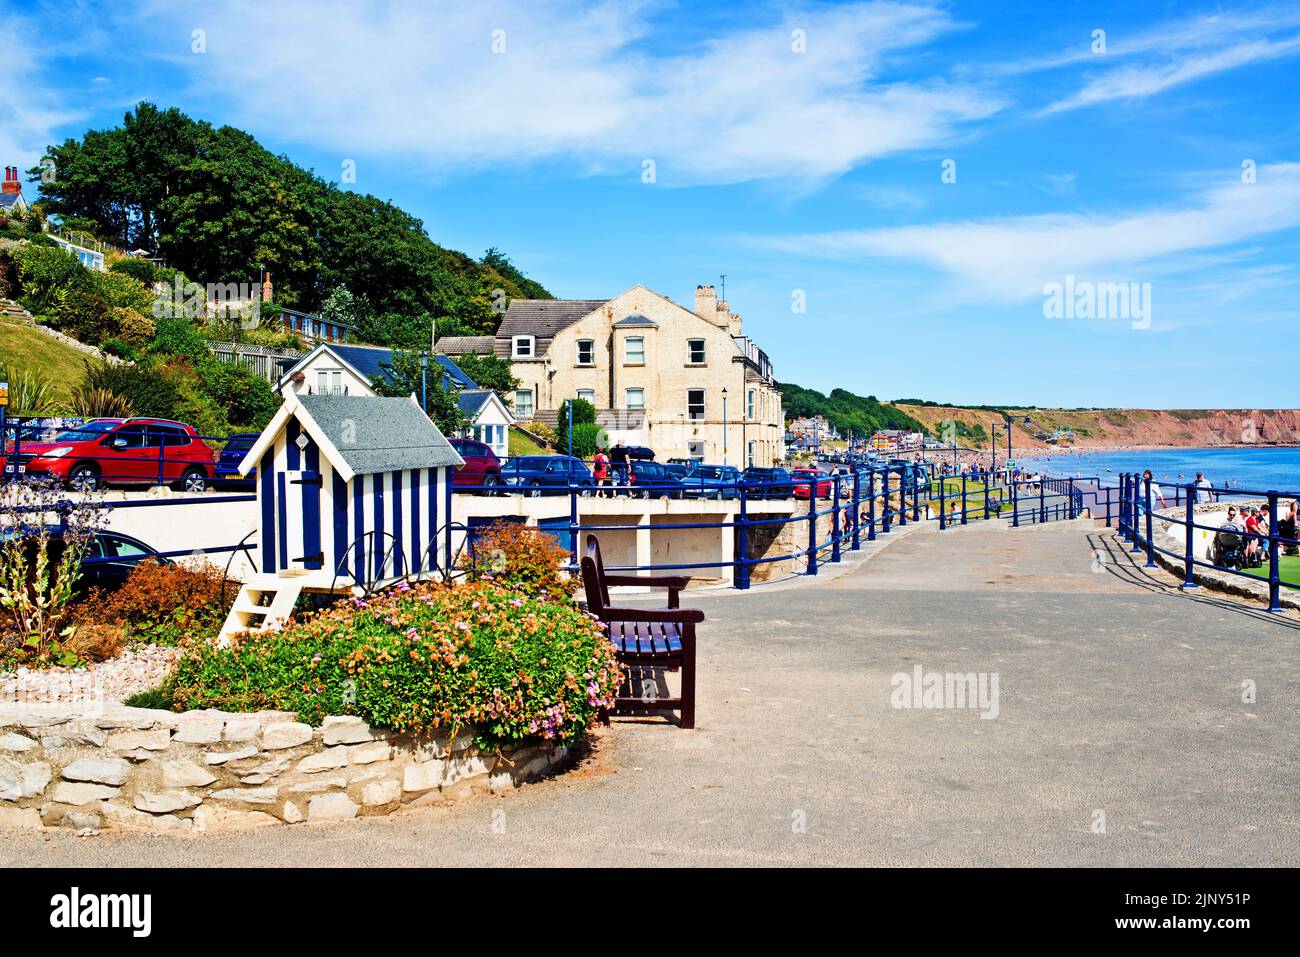 Seafront, Filey, North Yorkshire, England Stockfoto